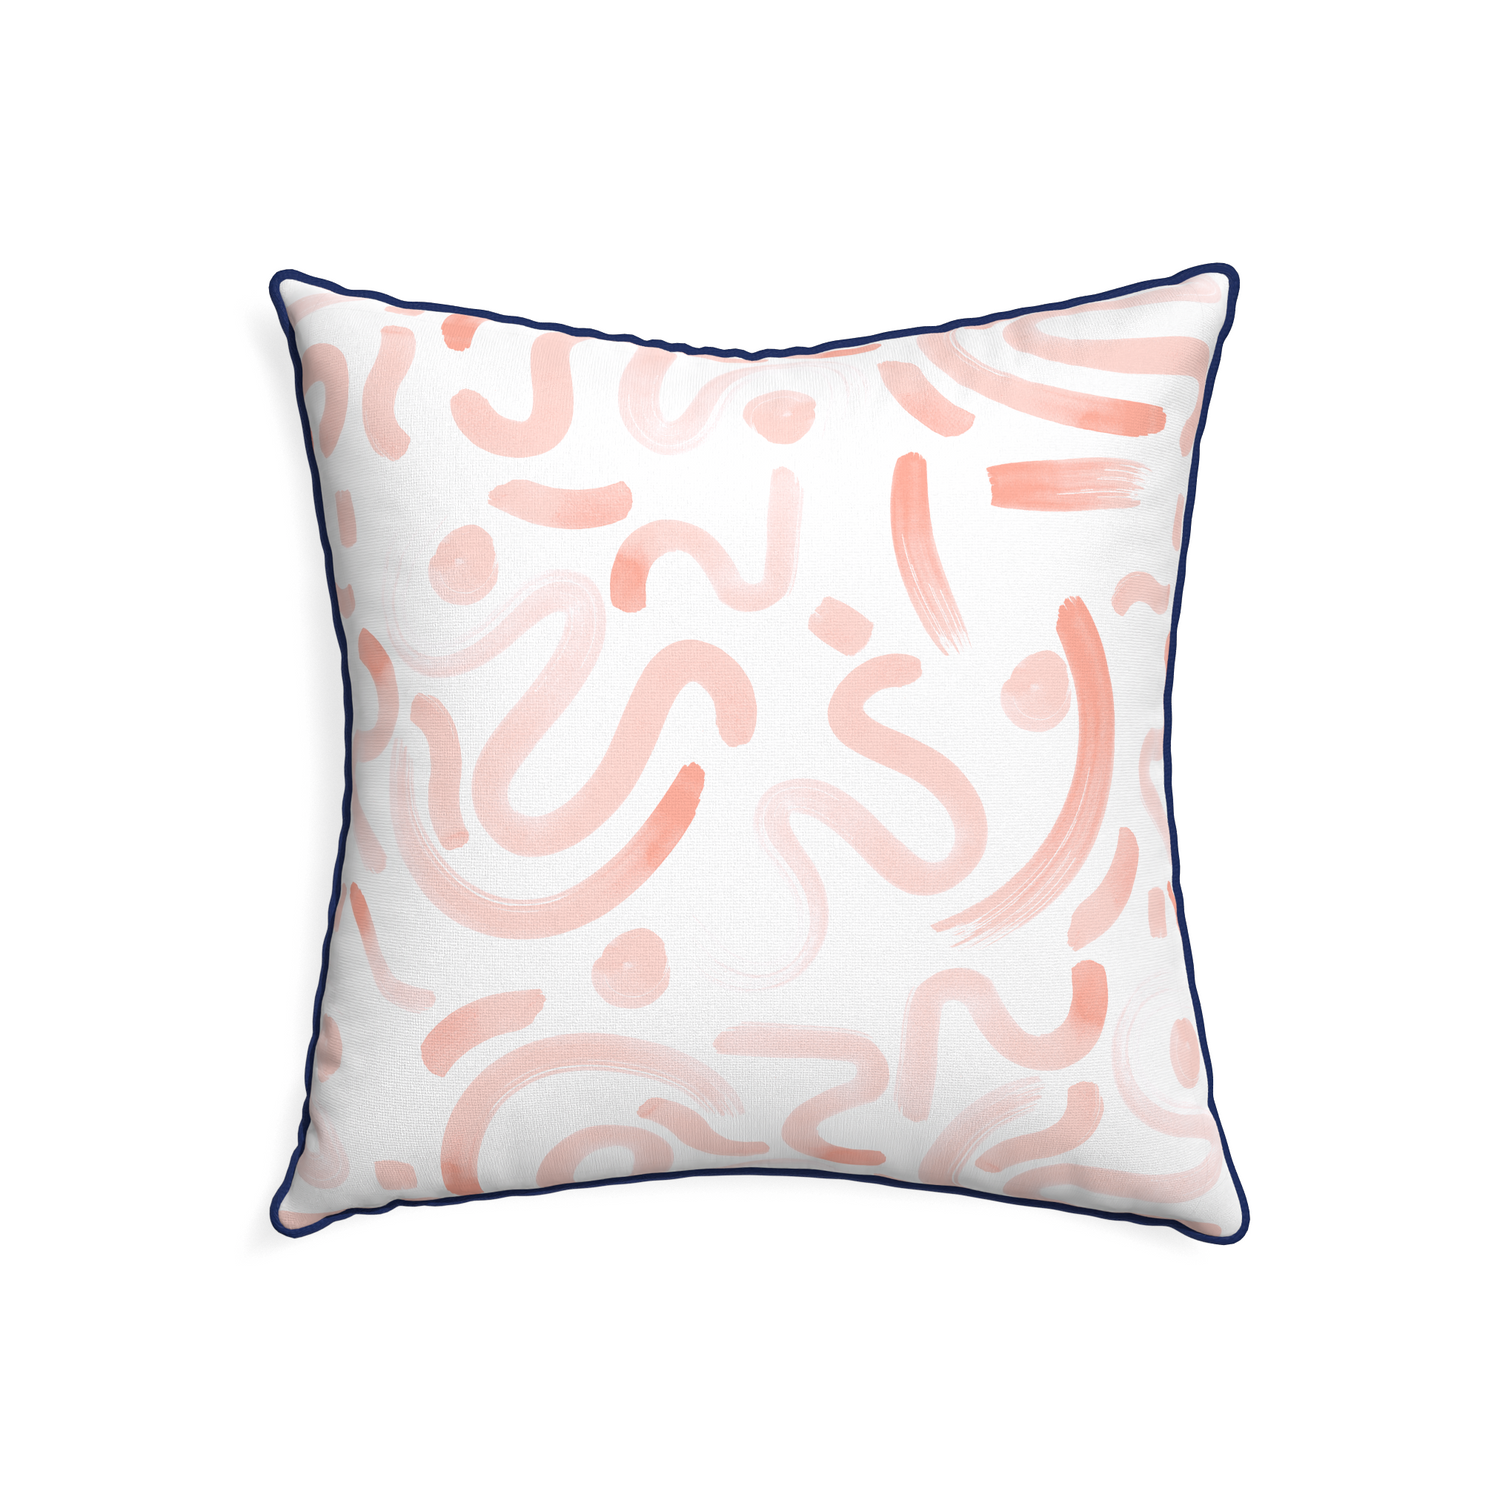 22-square hockney pink custom pink graphicpillow with midnight piping on white background